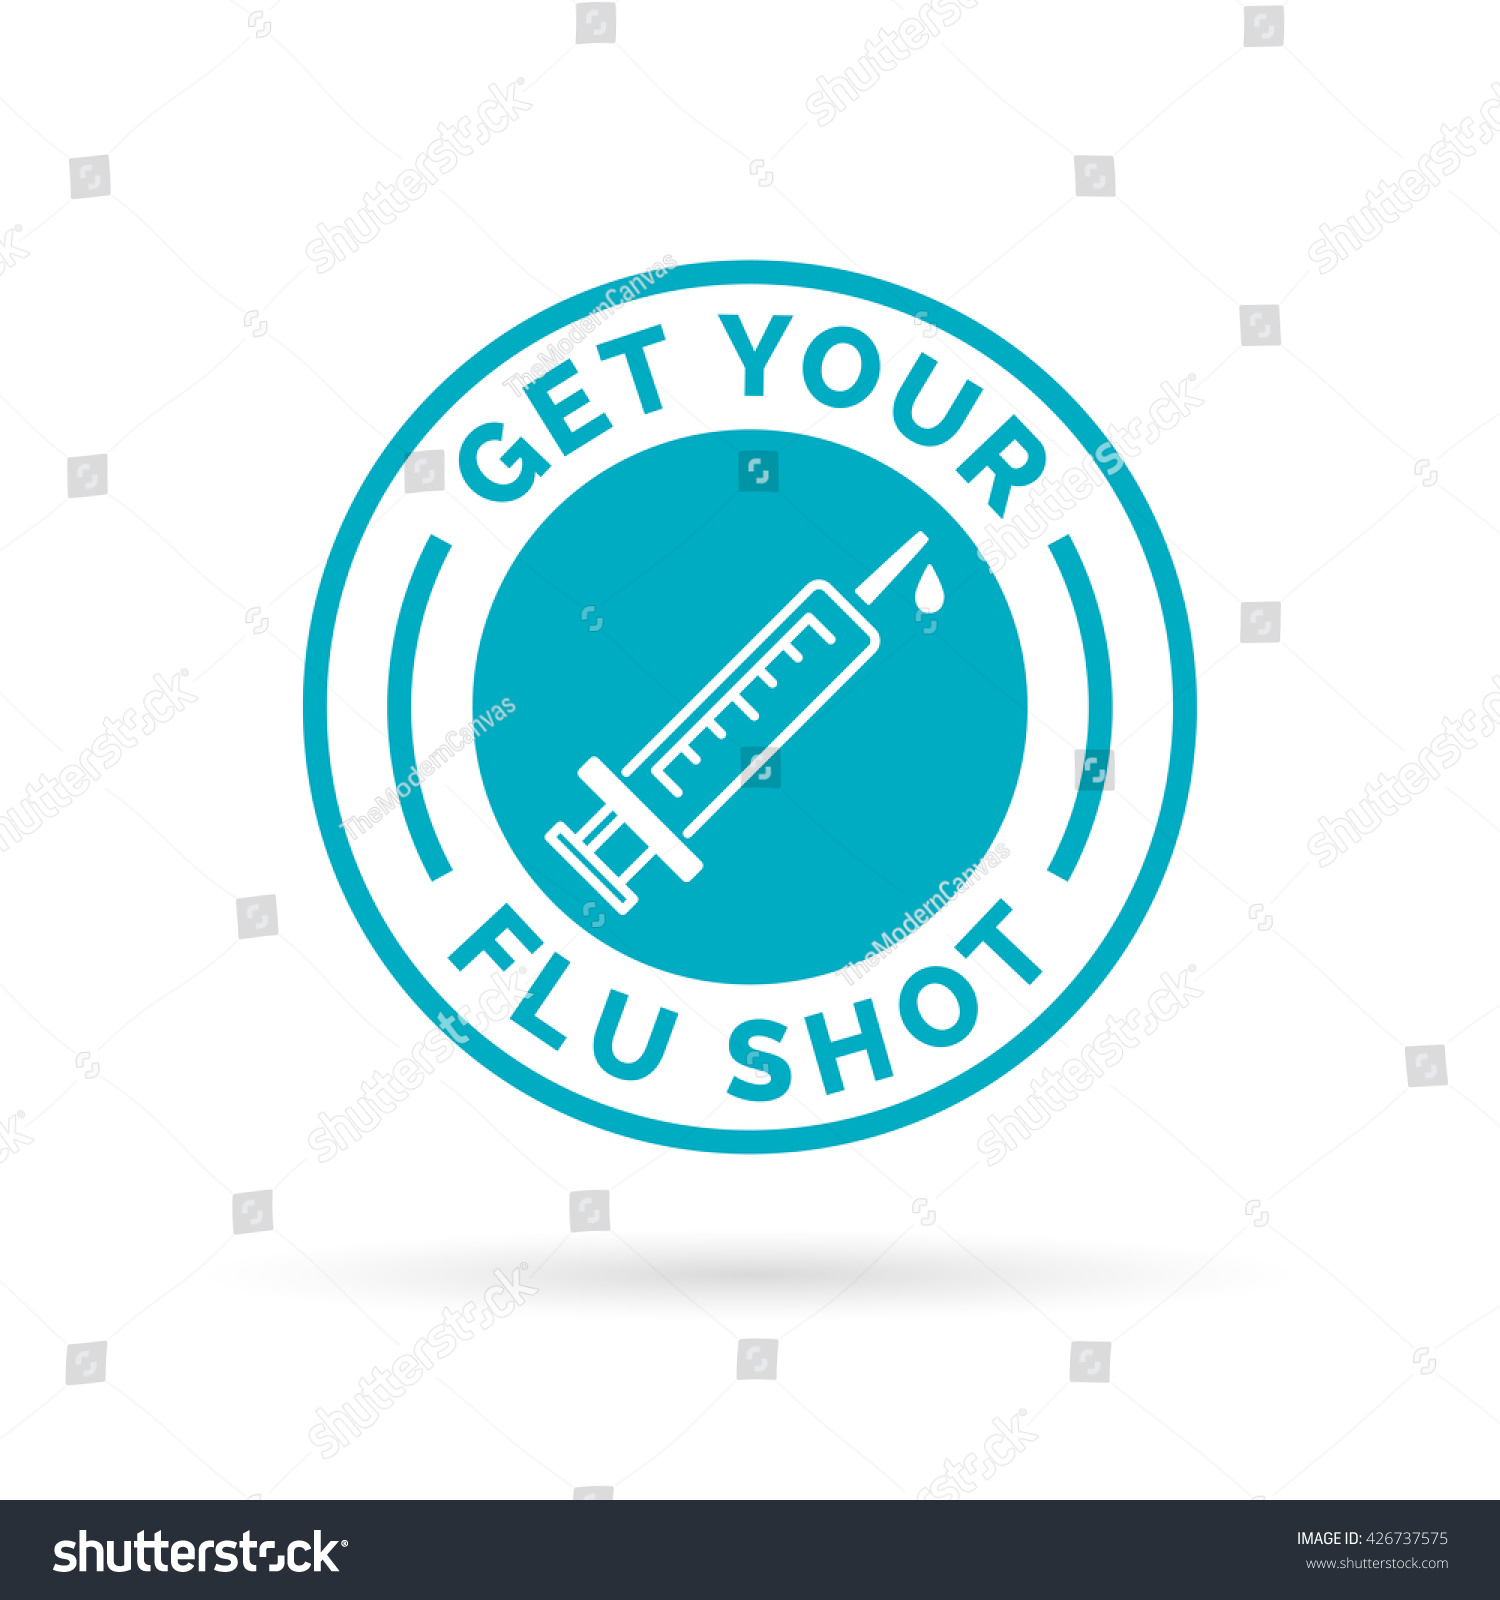 Get your flu shot vaccine sign badge with blue syringe injection icon. Vector illustration. #426737575